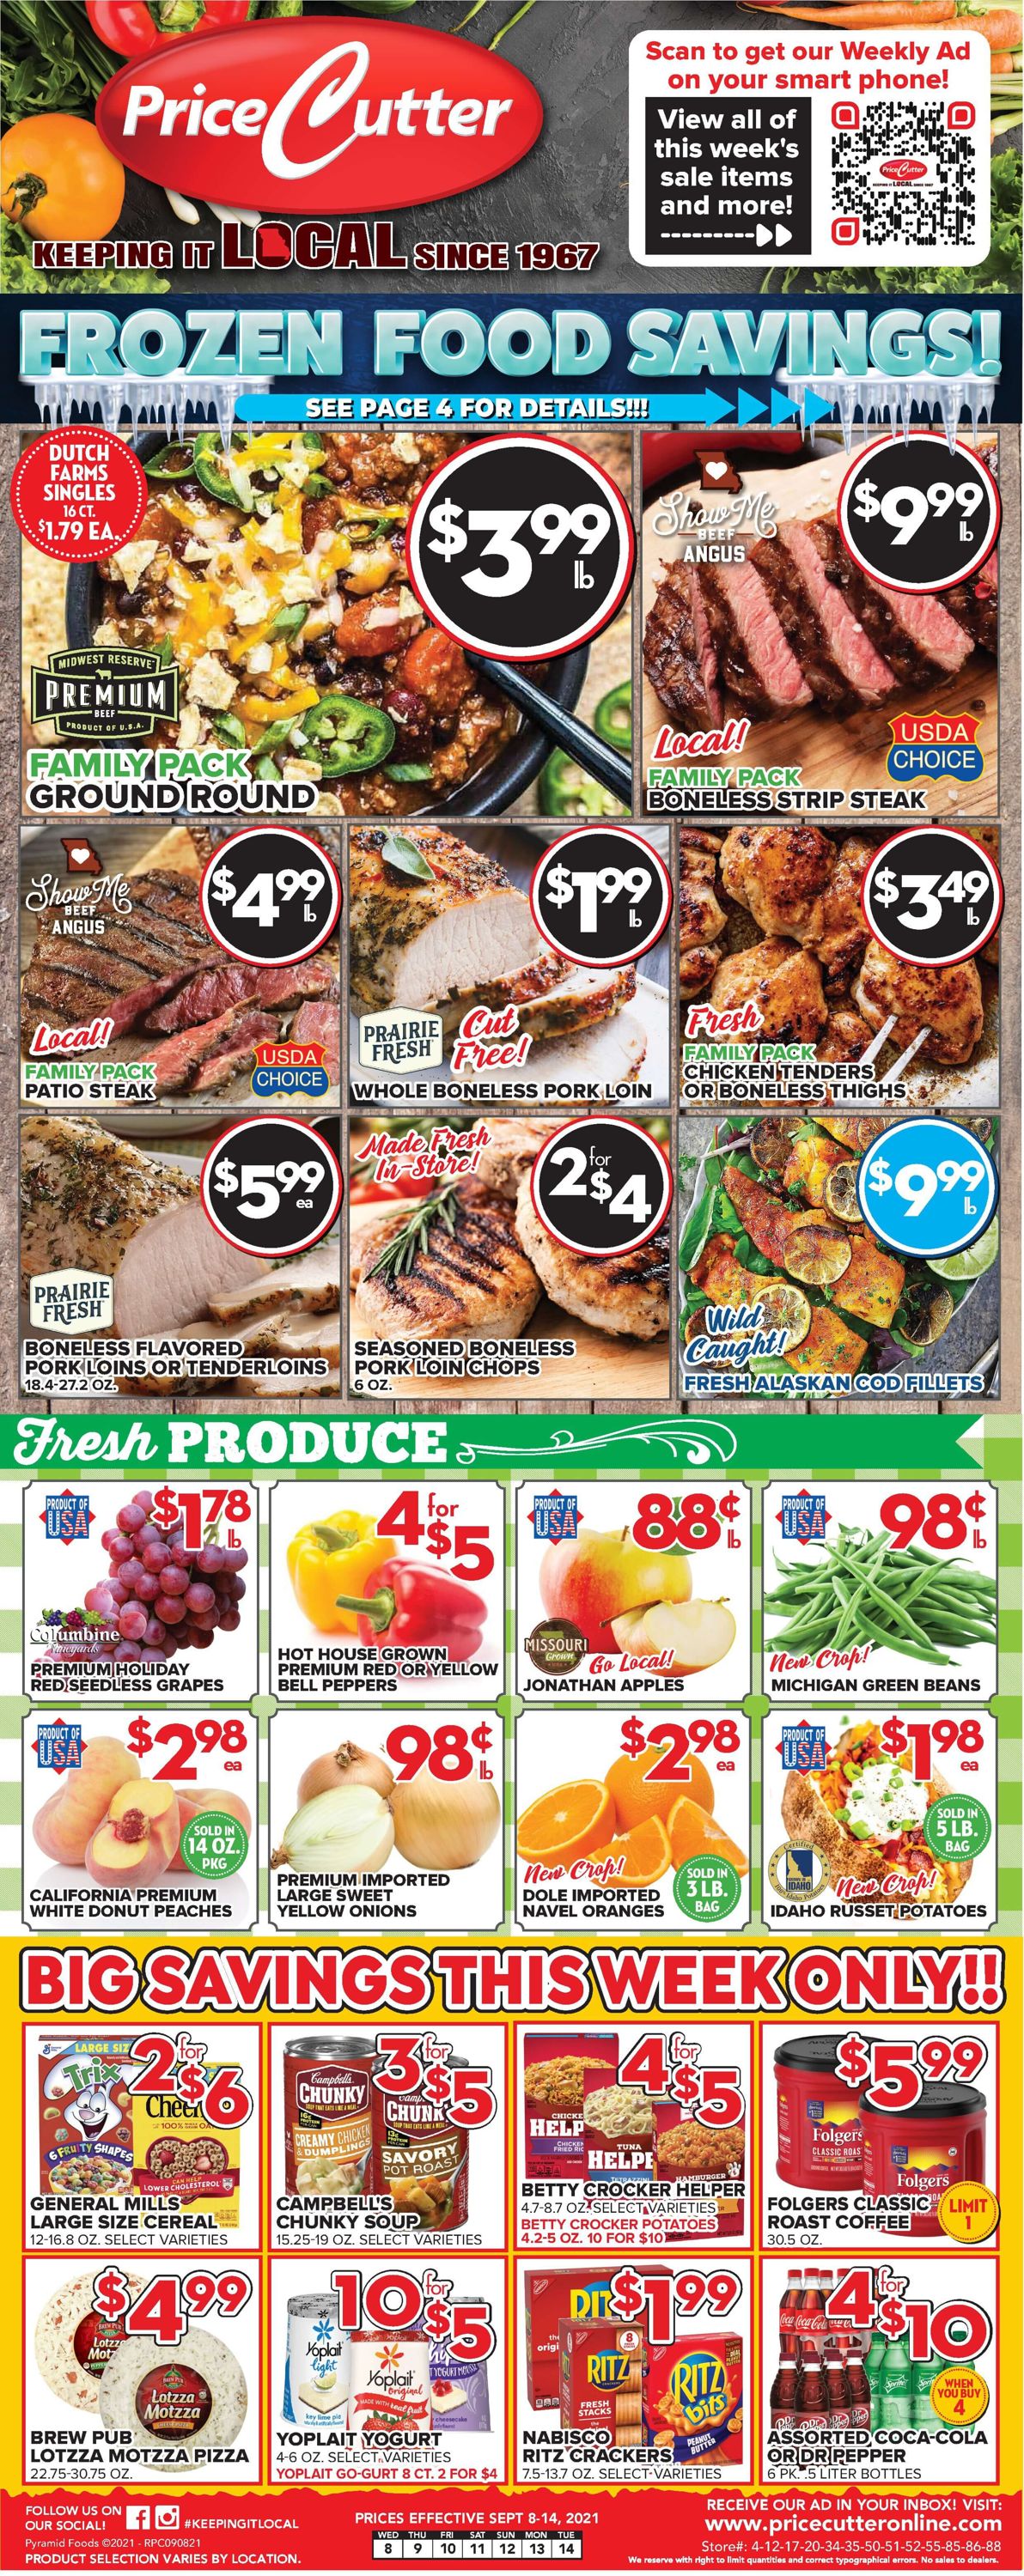 Price Cutter Weekly Ad Circular - valid 09/08-09/14/2021